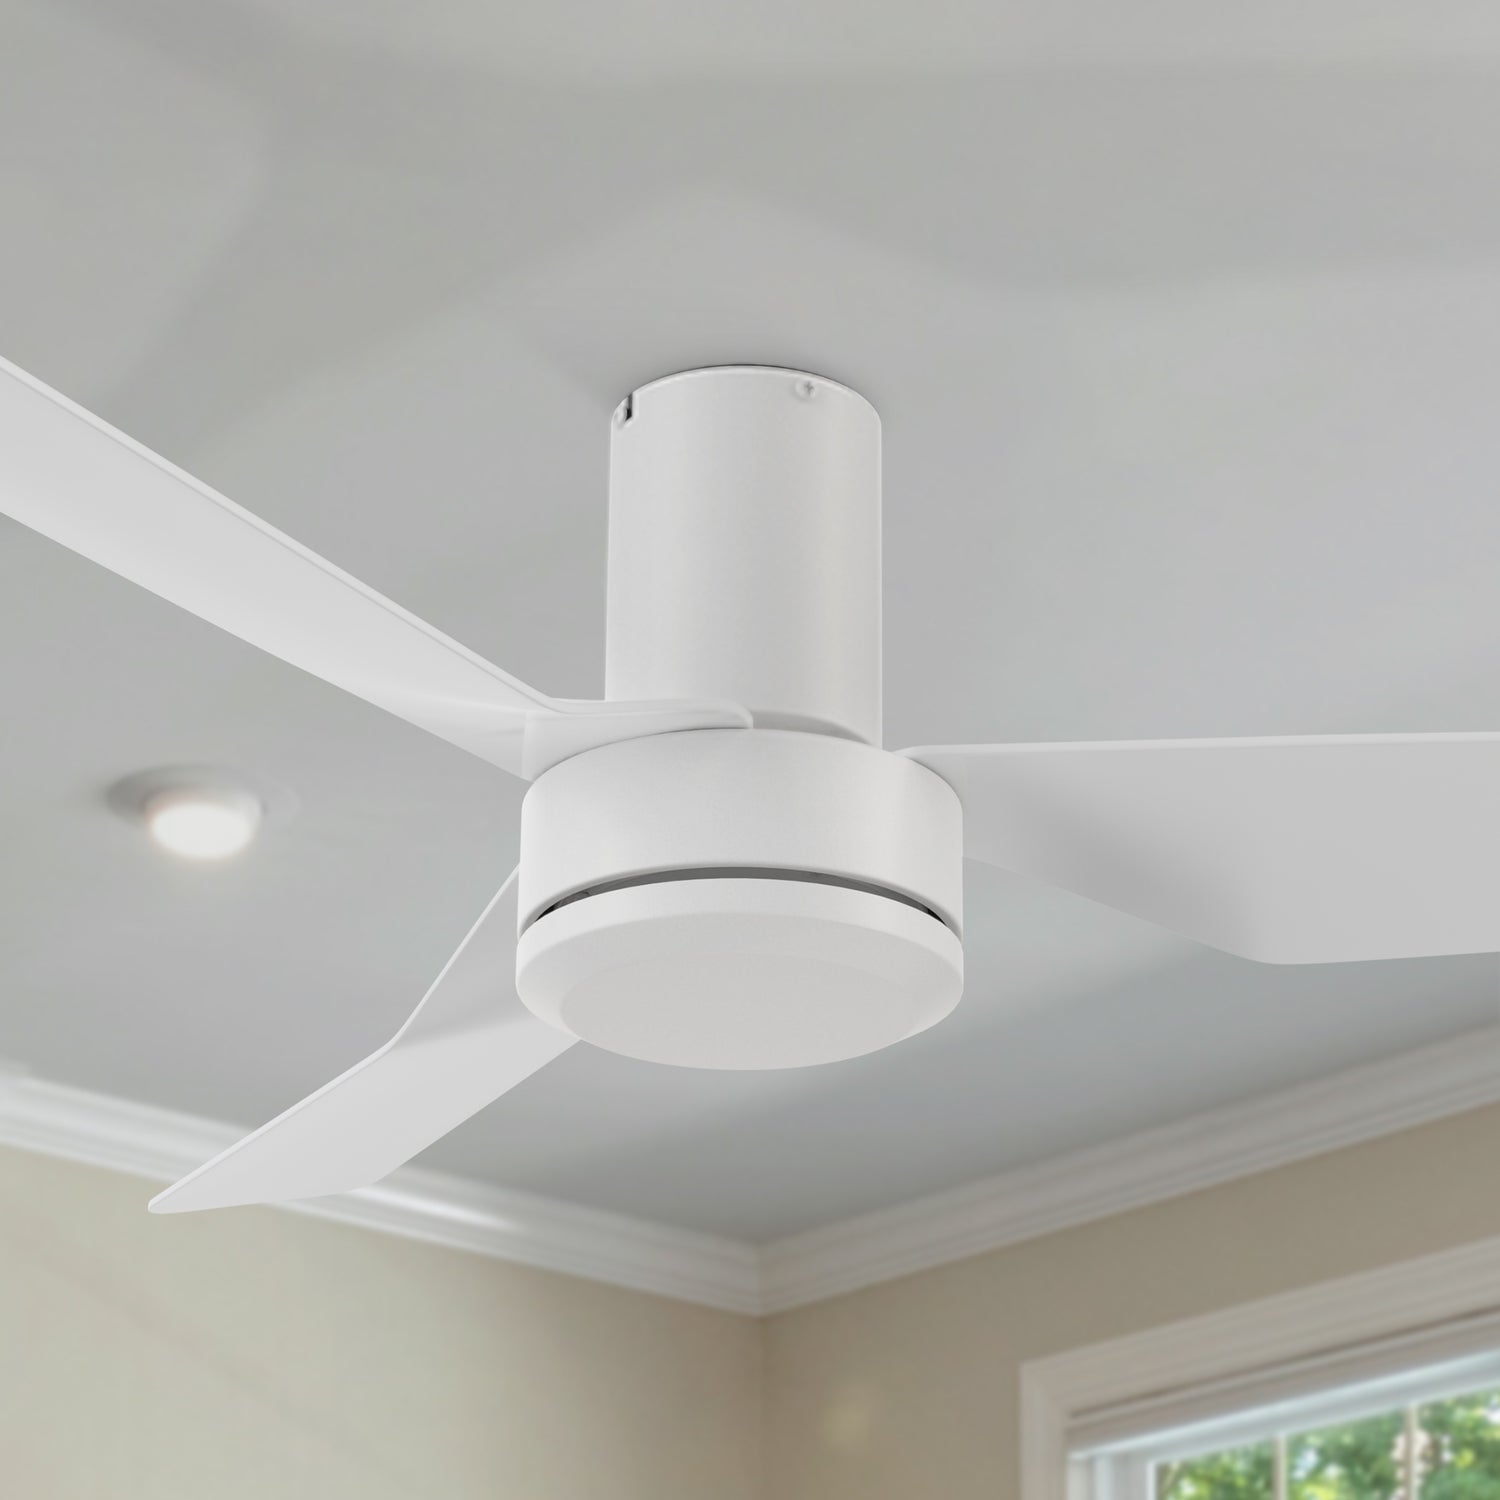 Enhance your indoor space with the 44in Ceiling Fan. Reversible DC motor, durable ABS blades, and modern design for personalized comfort. 